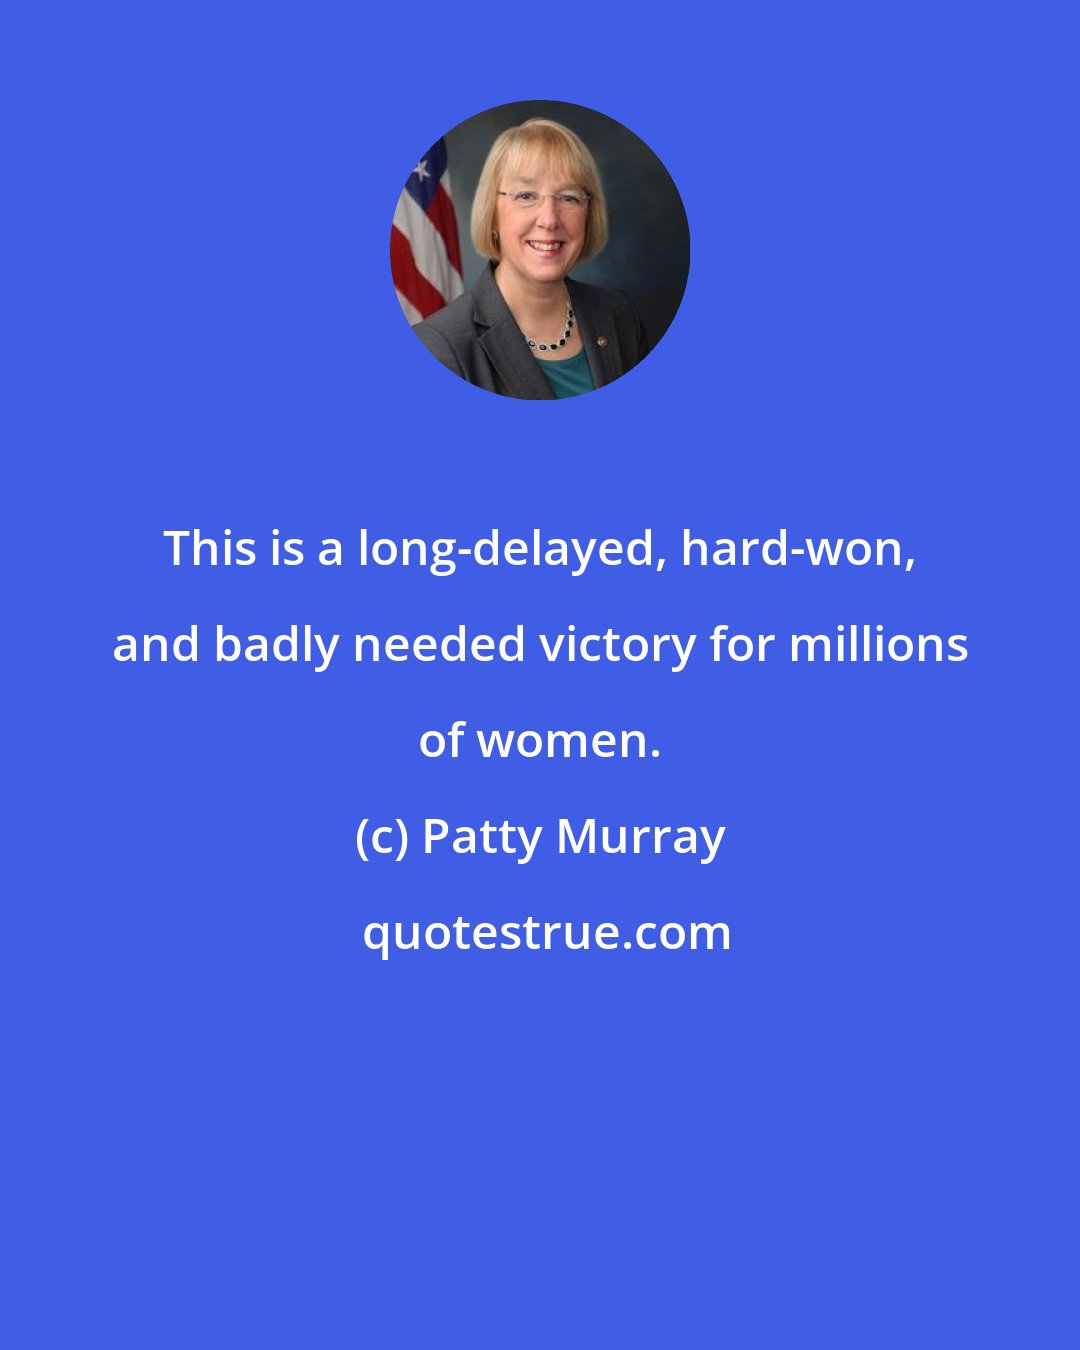 Patty Murray: This is a long-delayed, hard-won, and badly needed victory for millions of women.